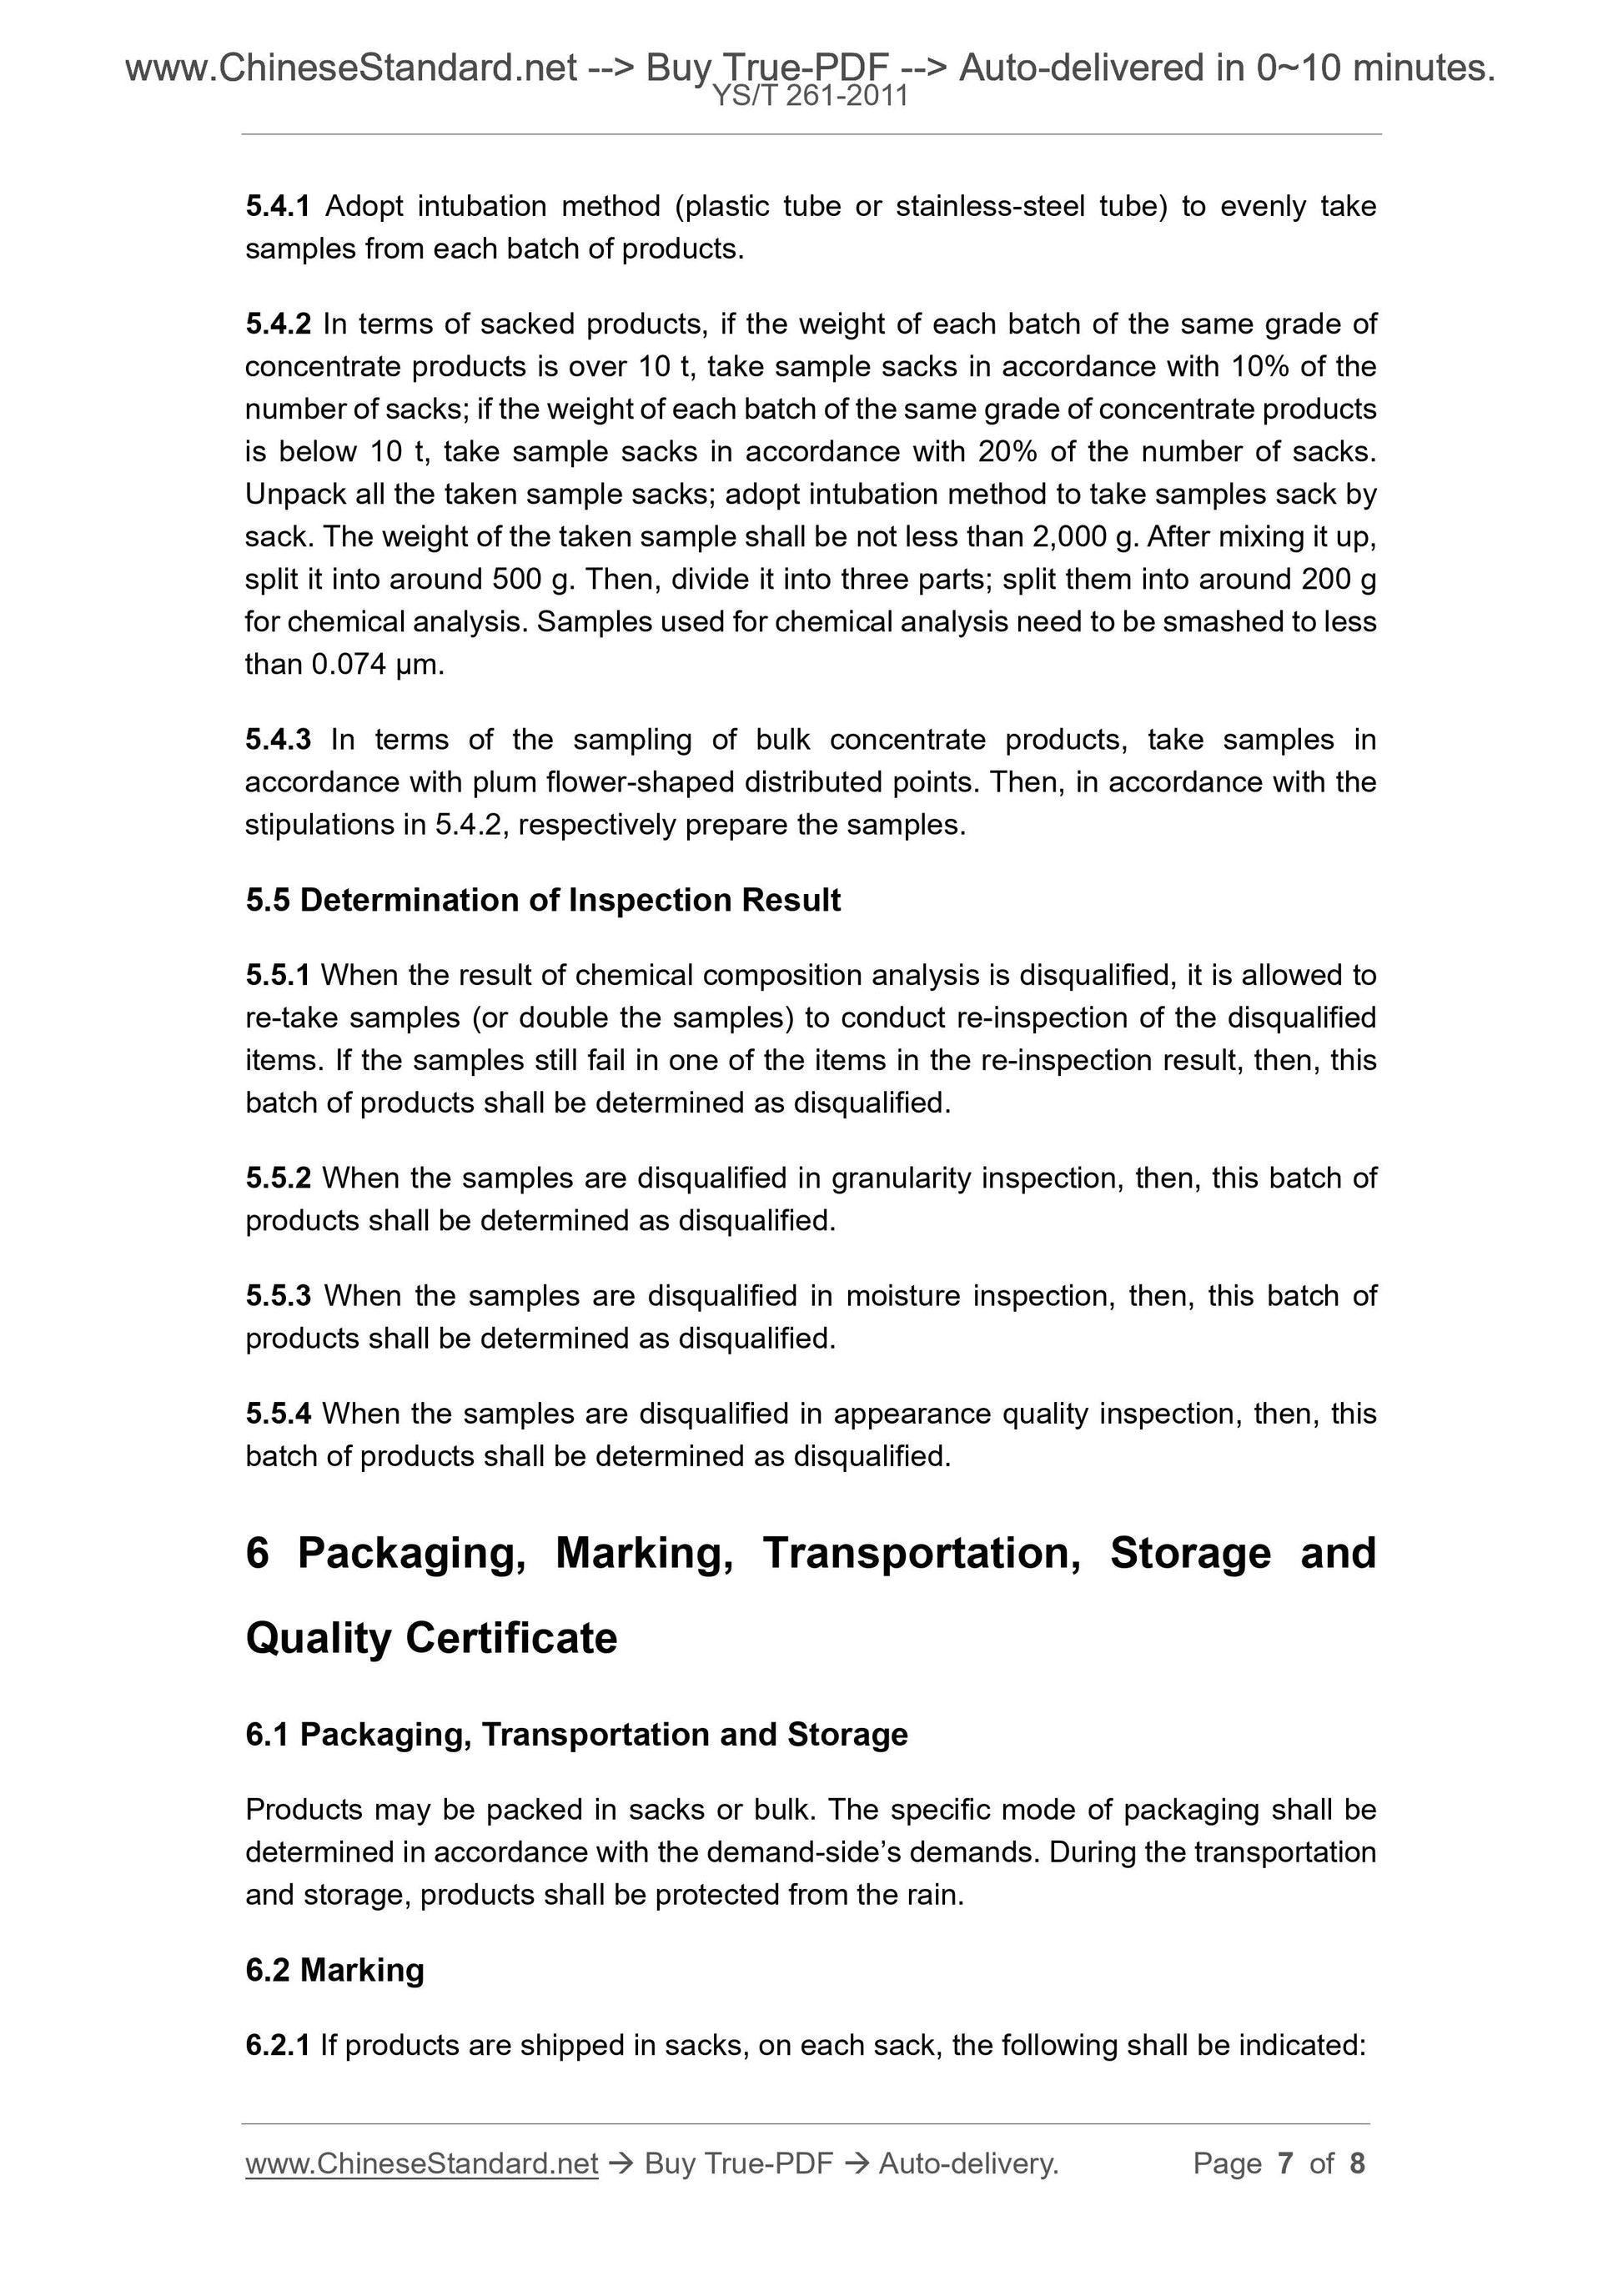 YS/T 261-2011 Page 4